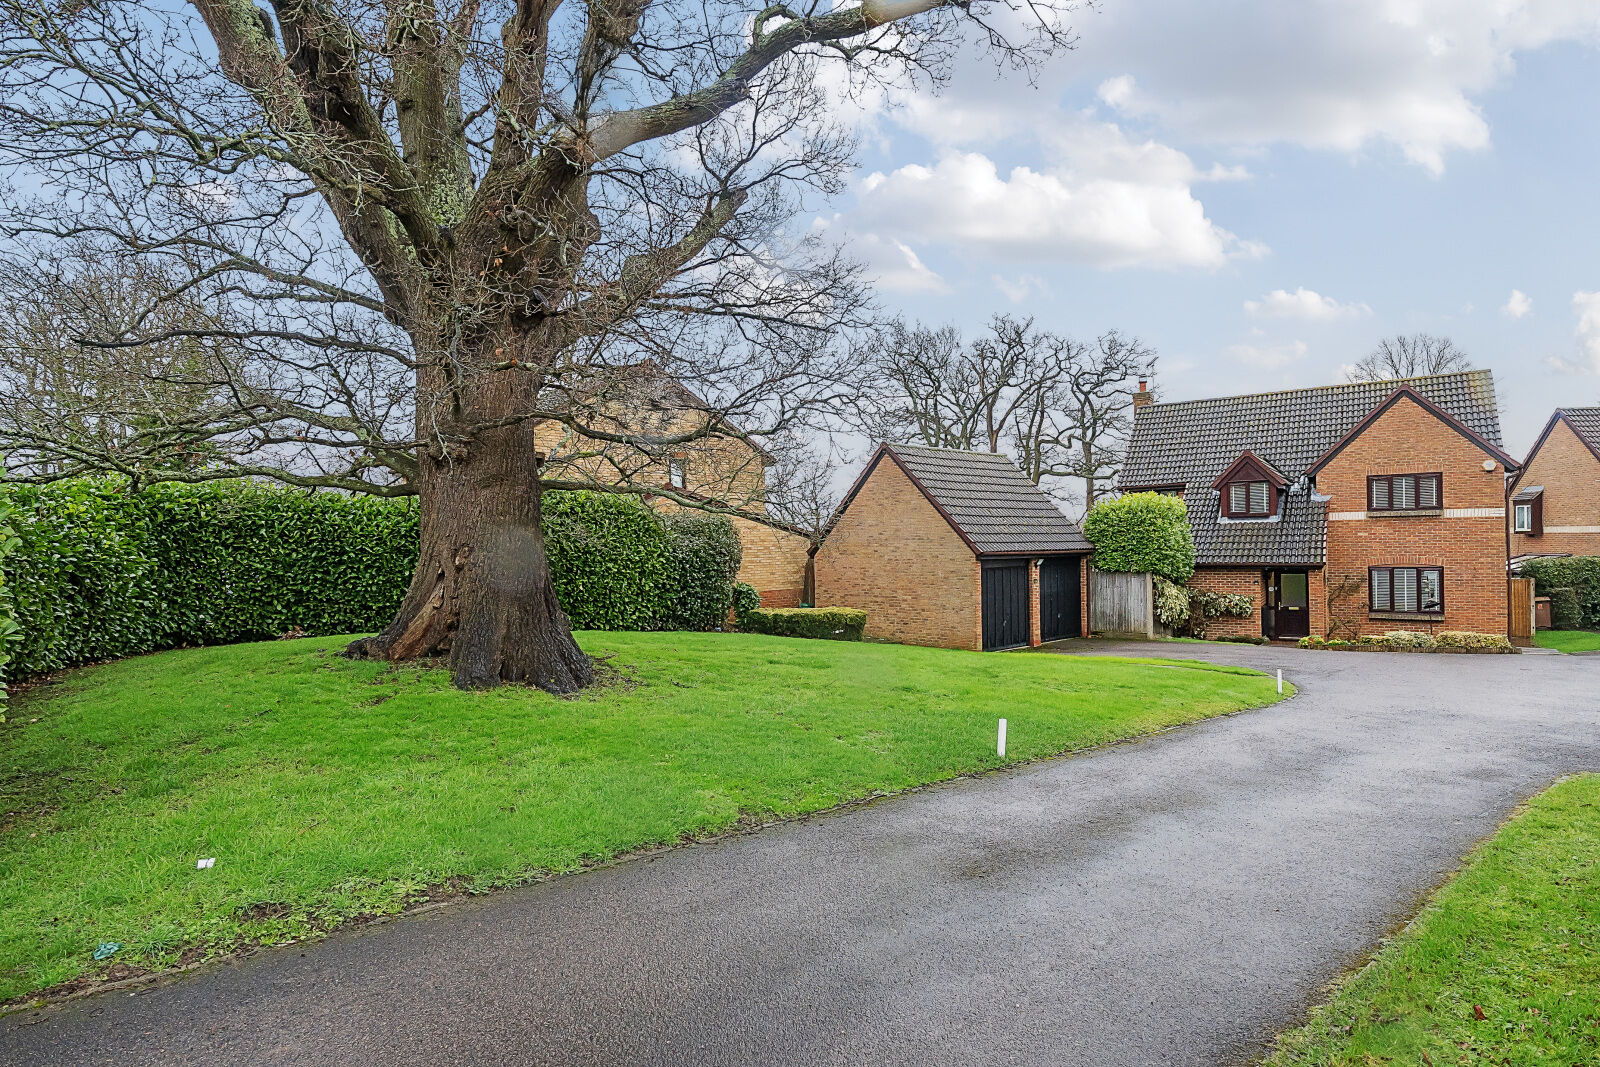 4 bedroom detached house for sale Broad Hinton, Twyford, RG10, main image